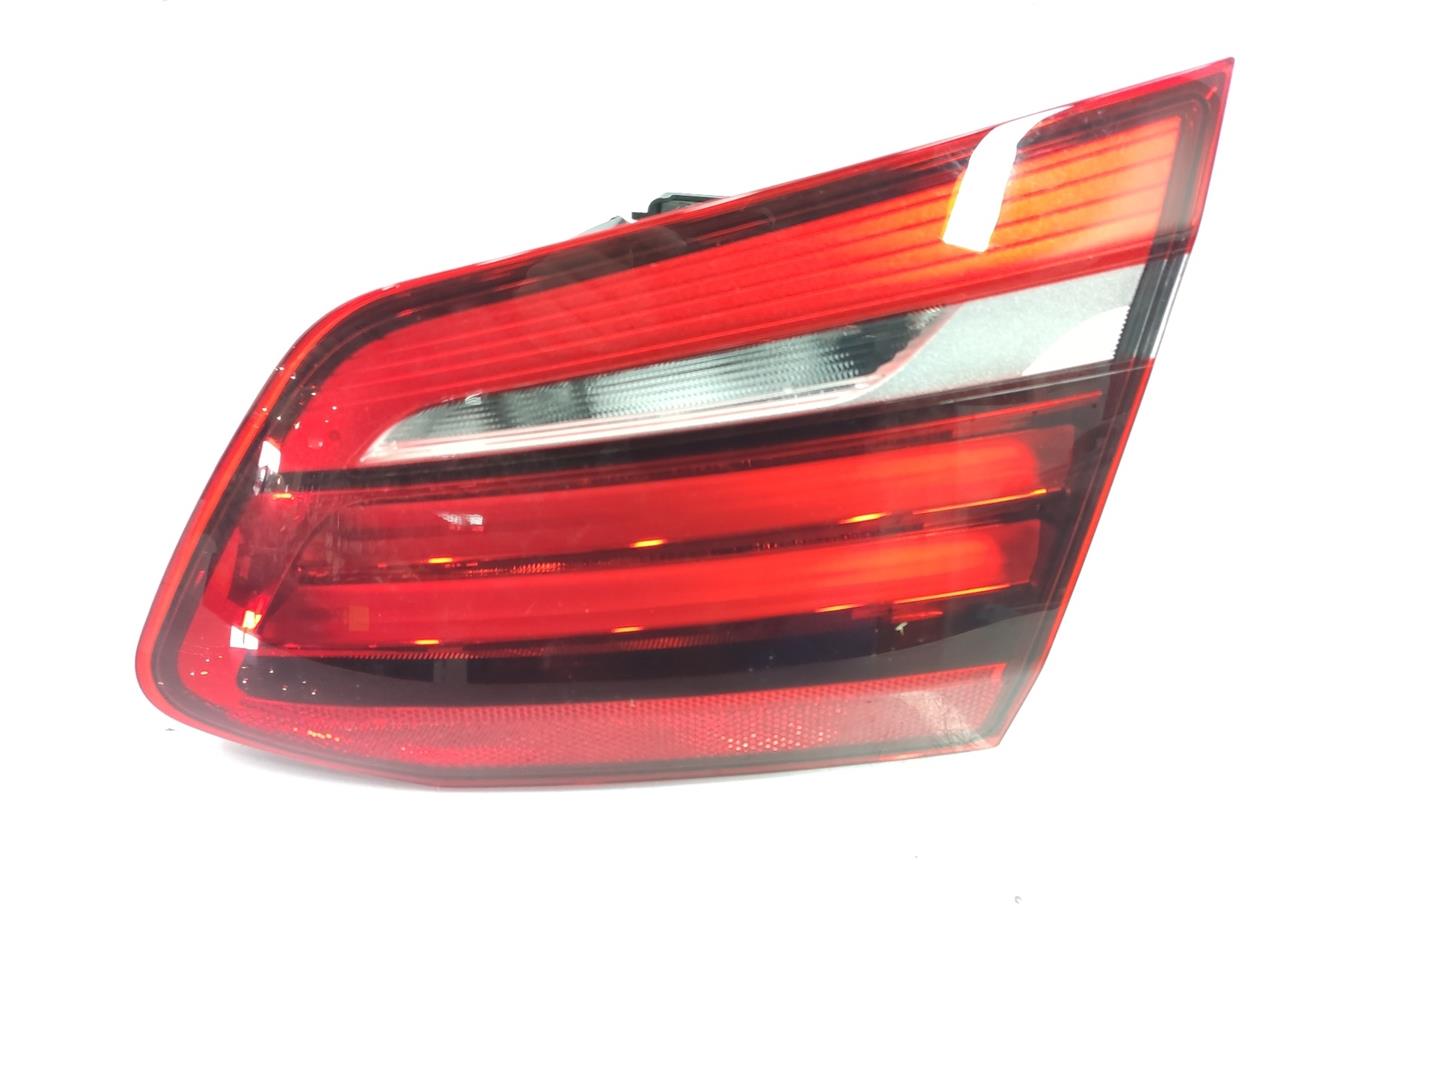 BMW 2 Series Active Tourer F45 (2014-2018) Rear Right Taillight Lamp 7491342, 63217491342, 1212CD 24134719